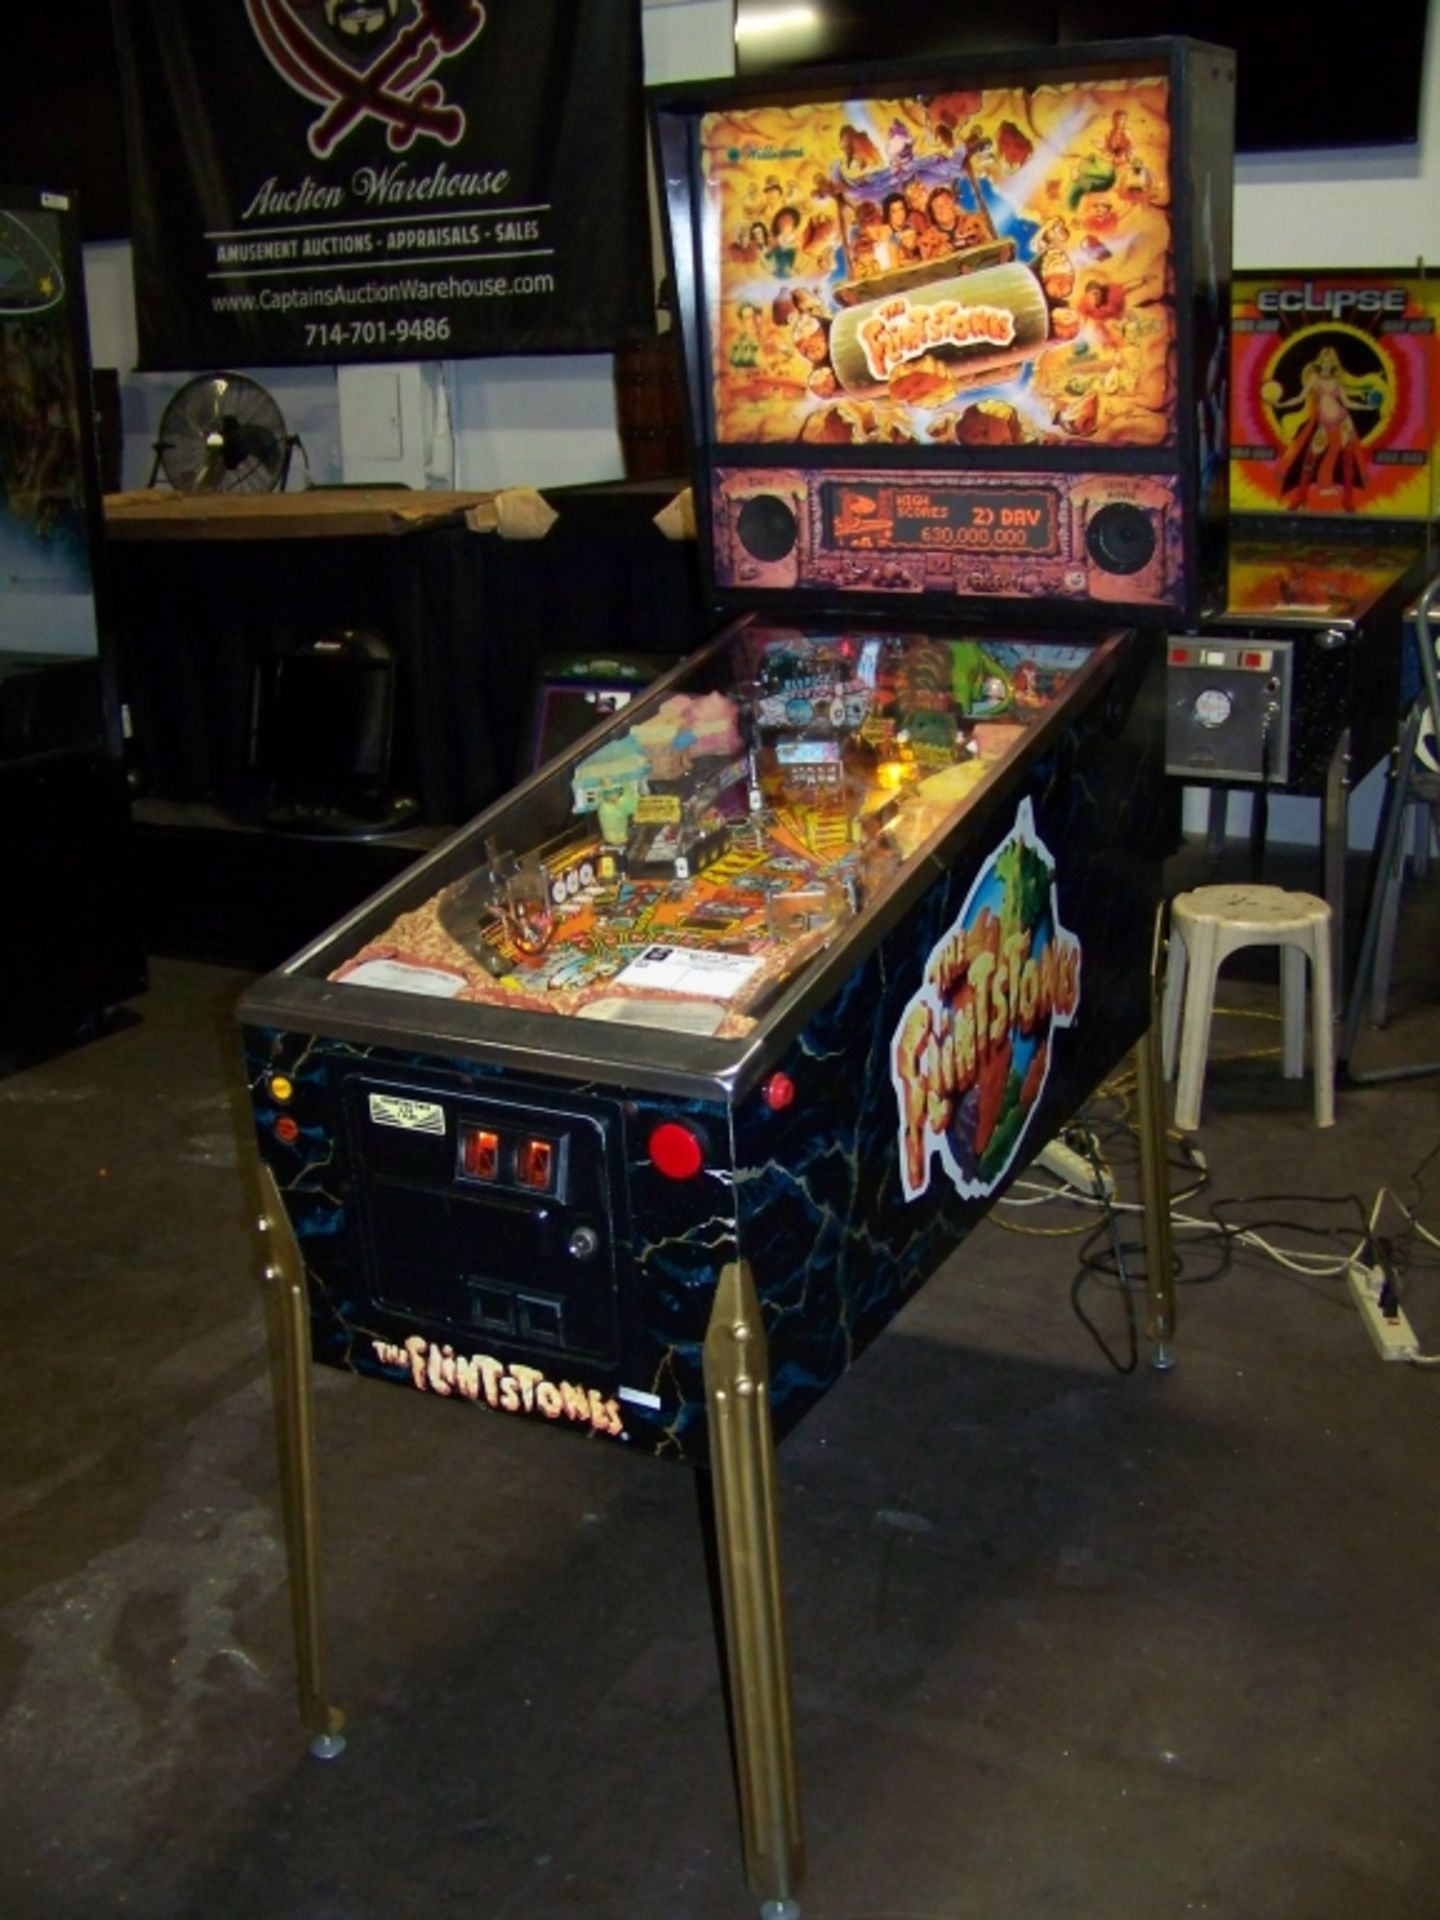 FLINSTONES THE MOVIE PINBALL MACHINE WILLIAMS 1994 Item is in used condition. Evidence of wear and - Image 2 of 11